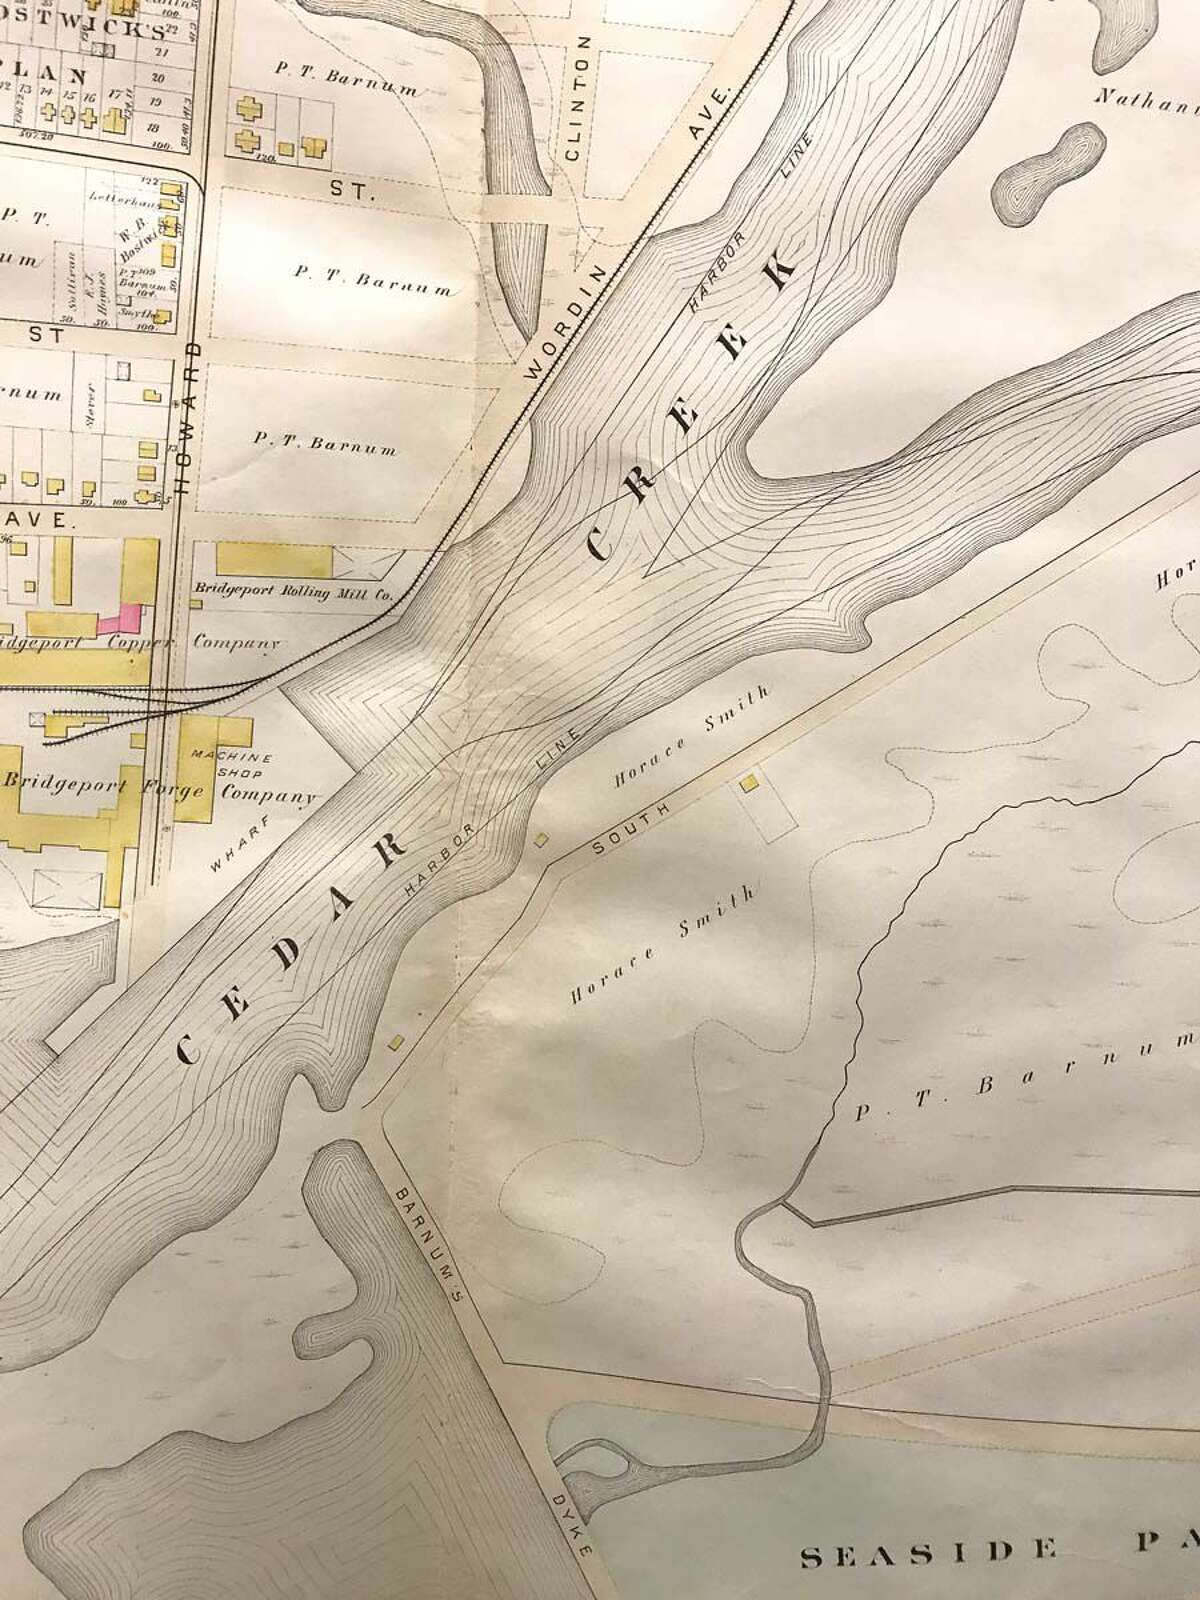 Wealthy businessman Hiram Smith was a neighbor to P.T. Barnum. His land holdings bordering Seaside Park, pictured here, might hold a clue to the location of buried treasure.